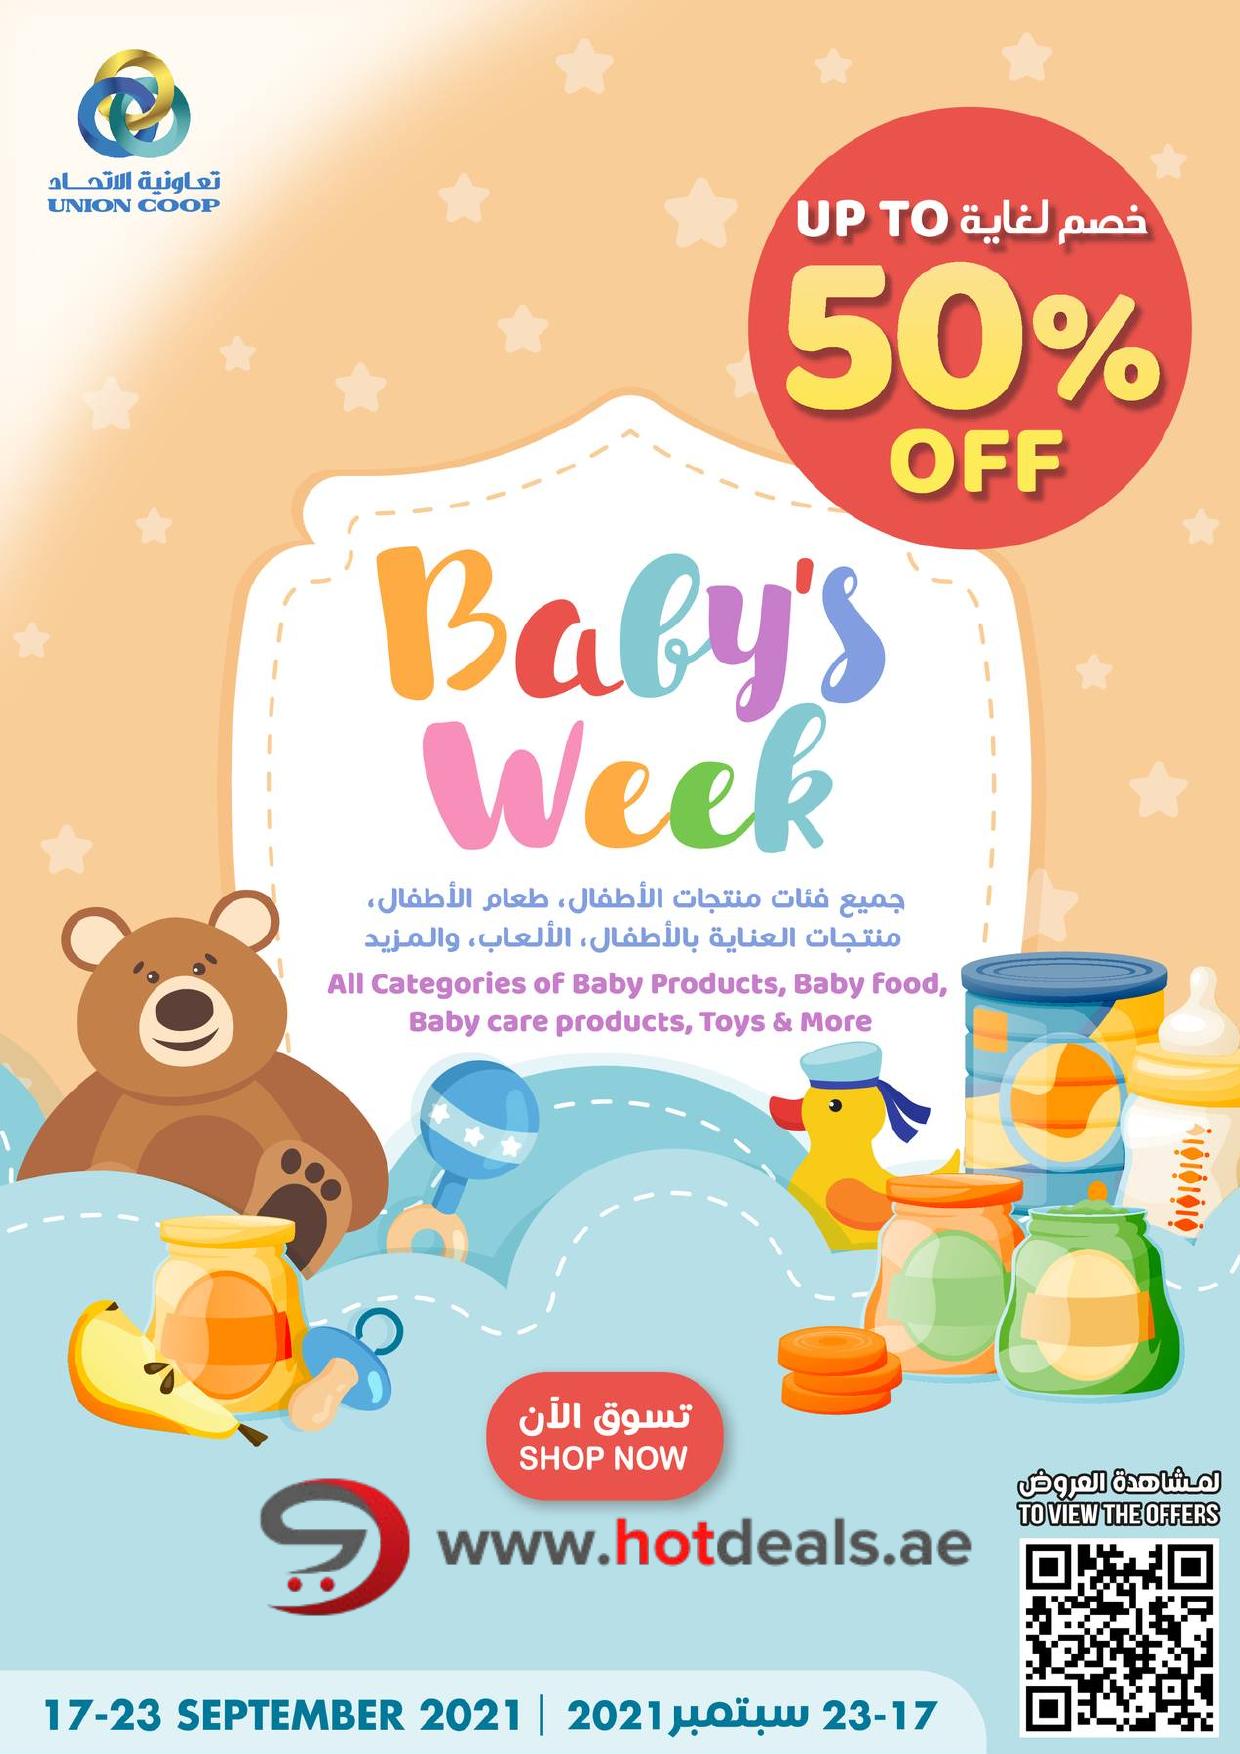 <p><span style="font-size: 18px;"><font color="#424242">Baby's Week</font></span><br></p>